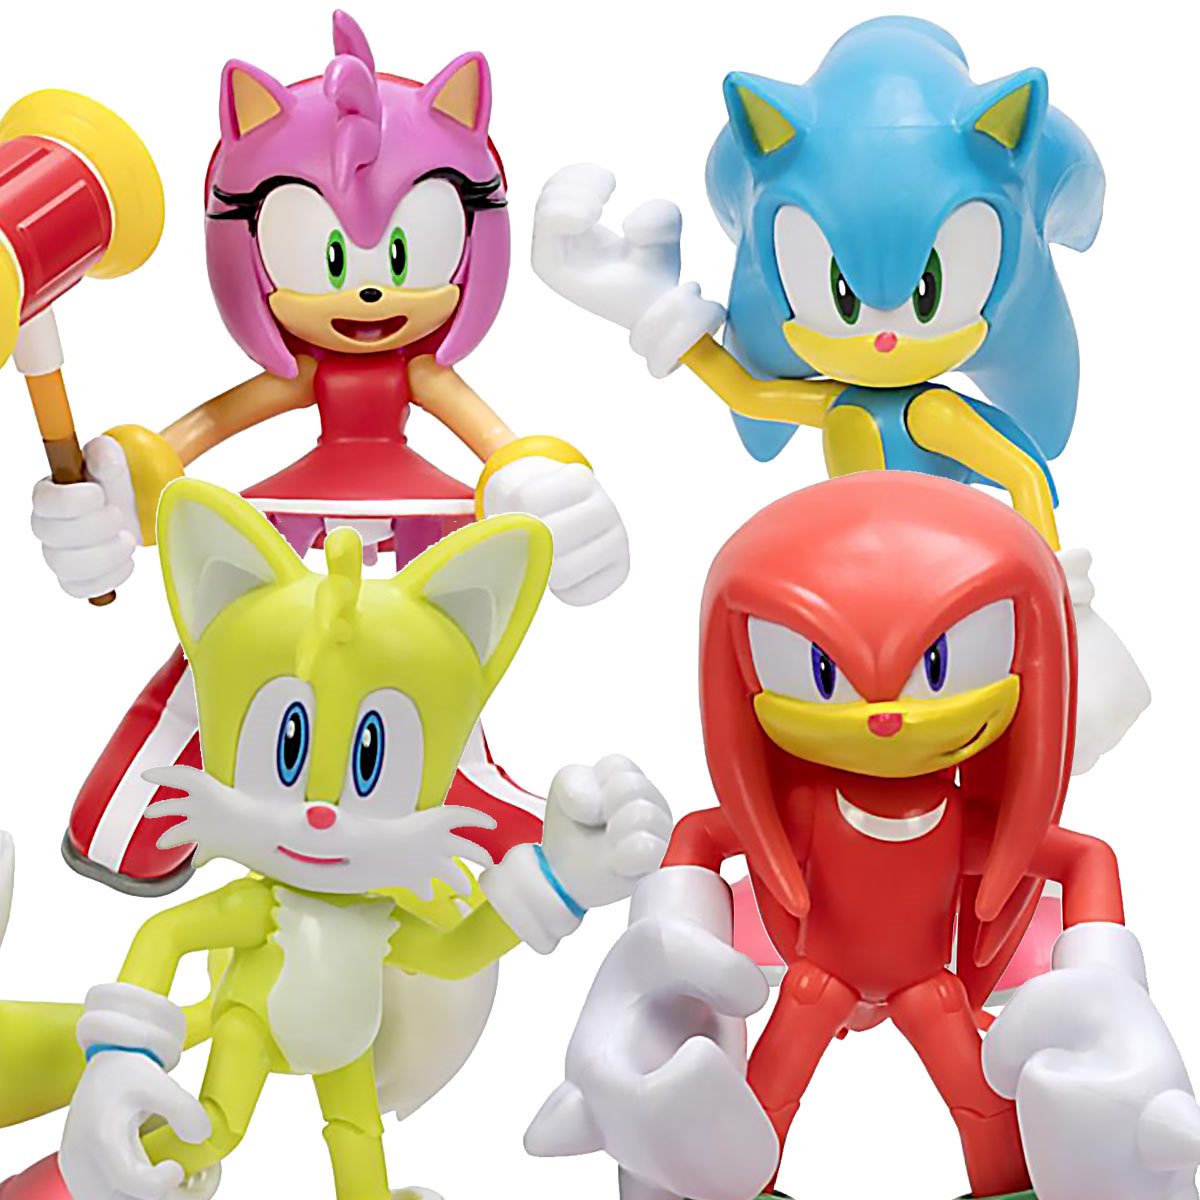 Sonic the Hedgehog 4 inch Action Figure - Modern Tails with Ring